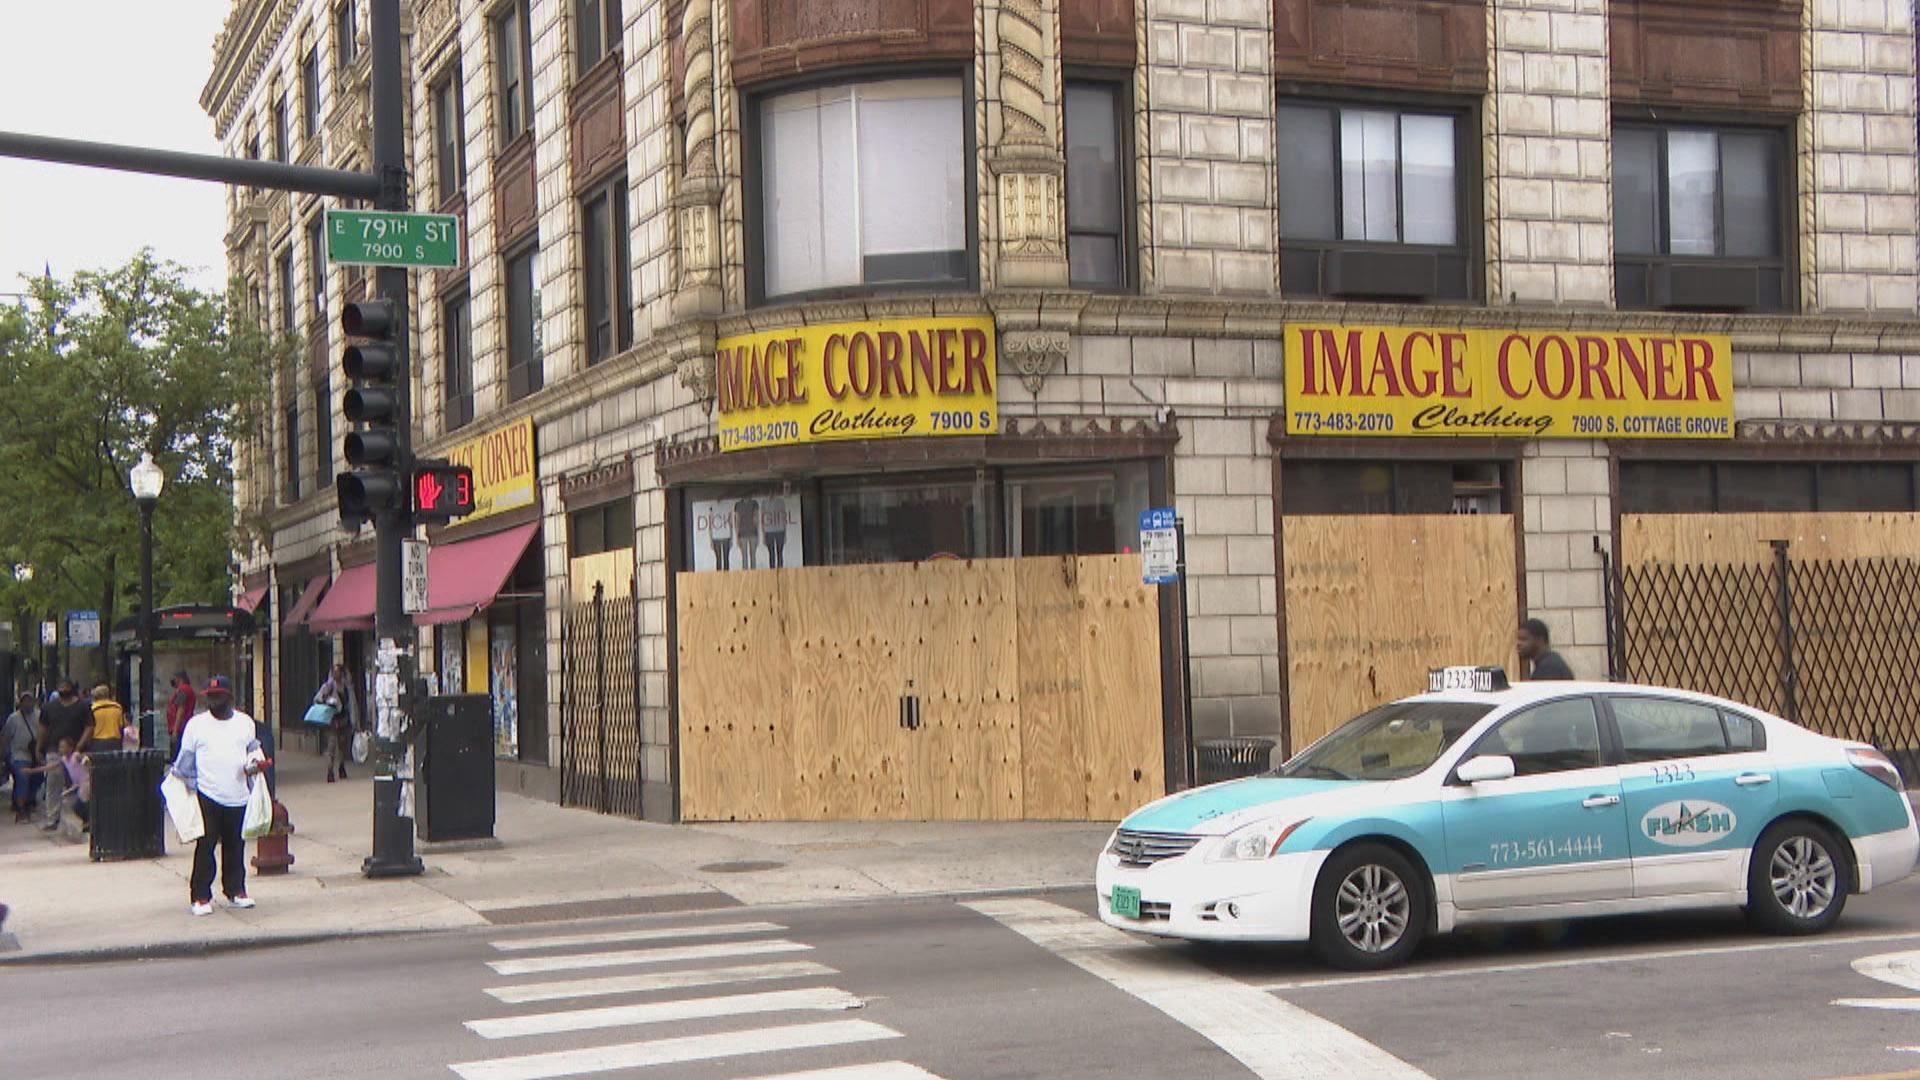 A business is boarded up in Chicago’s Chatham neighborhood on the city’s South Side on Wednesday, June 3, 2020, following unrest over the killing of George Floyd. (WTTW News)